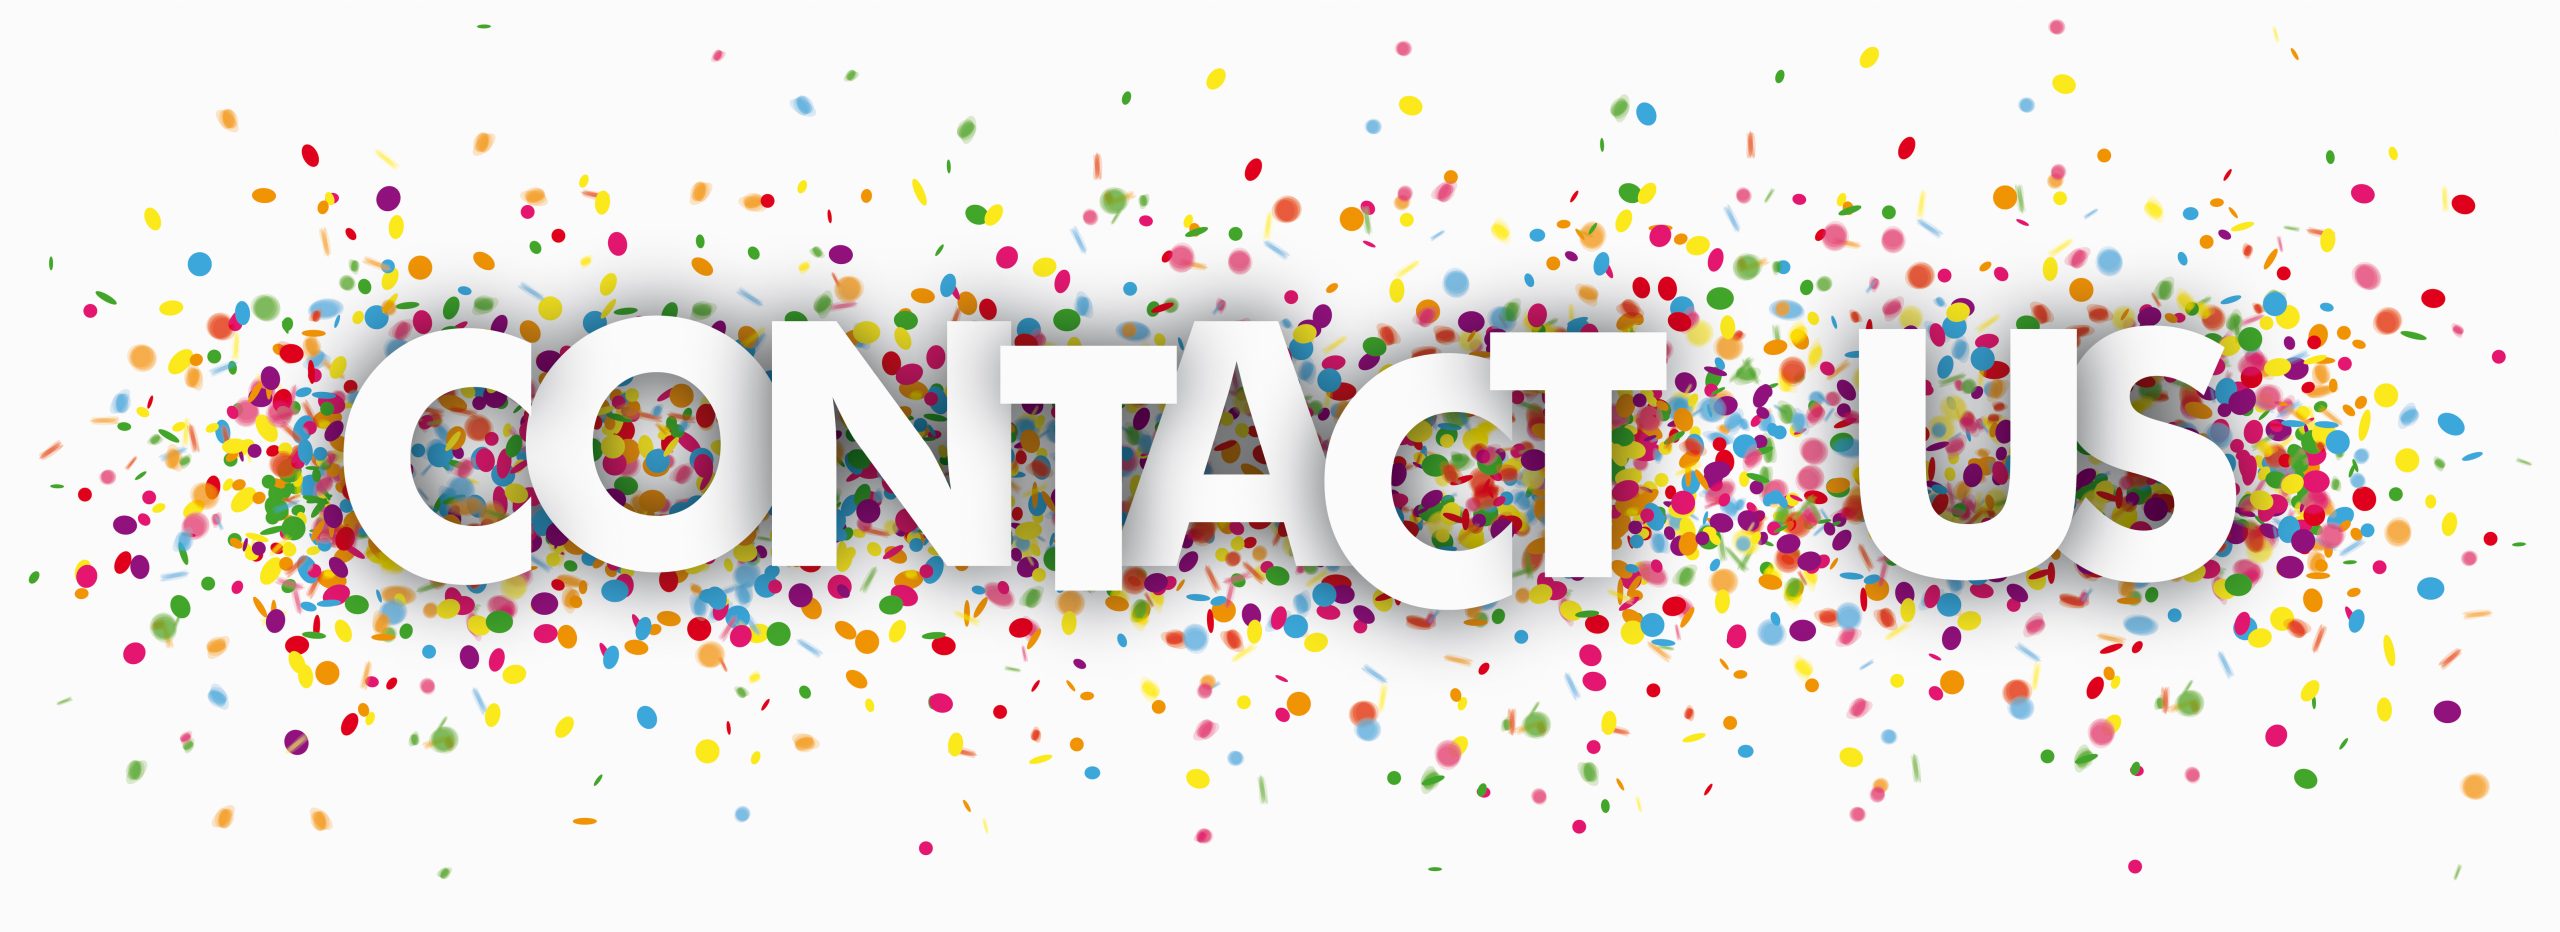 Text Contact Us with colored confetti. Eps 10 vector file.